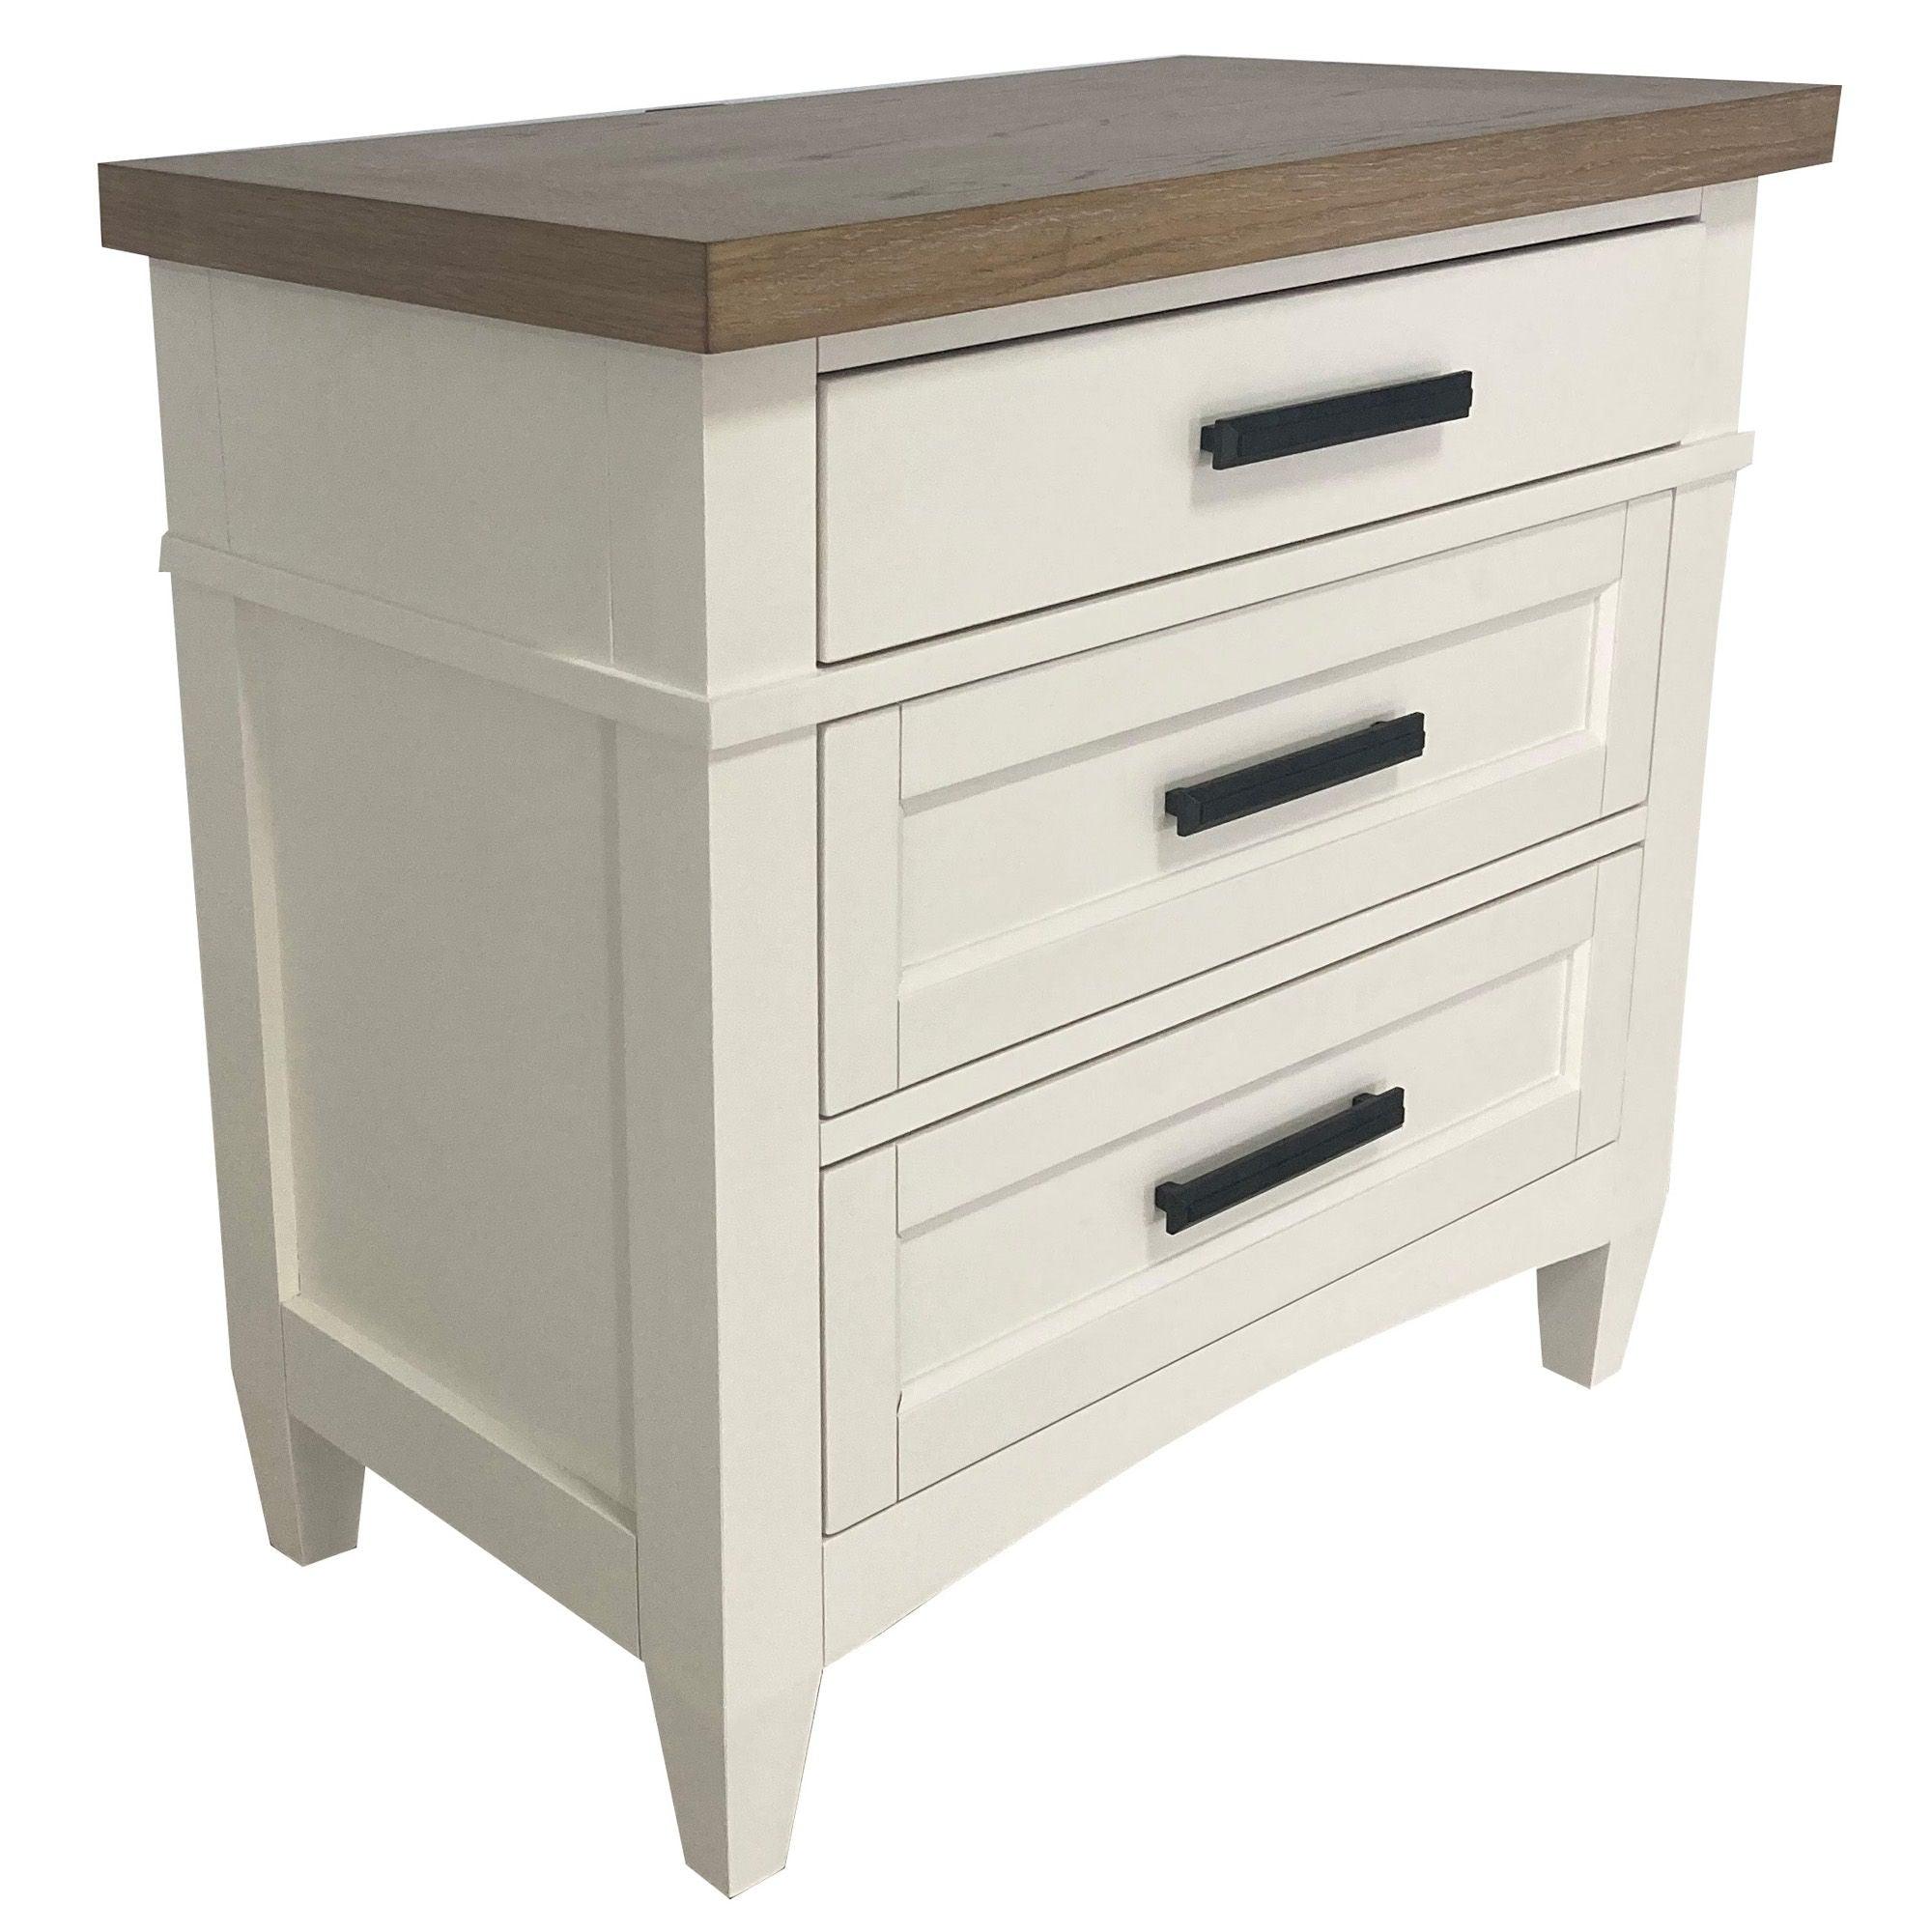 Parker House - Americana Modern Bedroom - 2 Drawer Nightstand - 5th Avenue Furniture